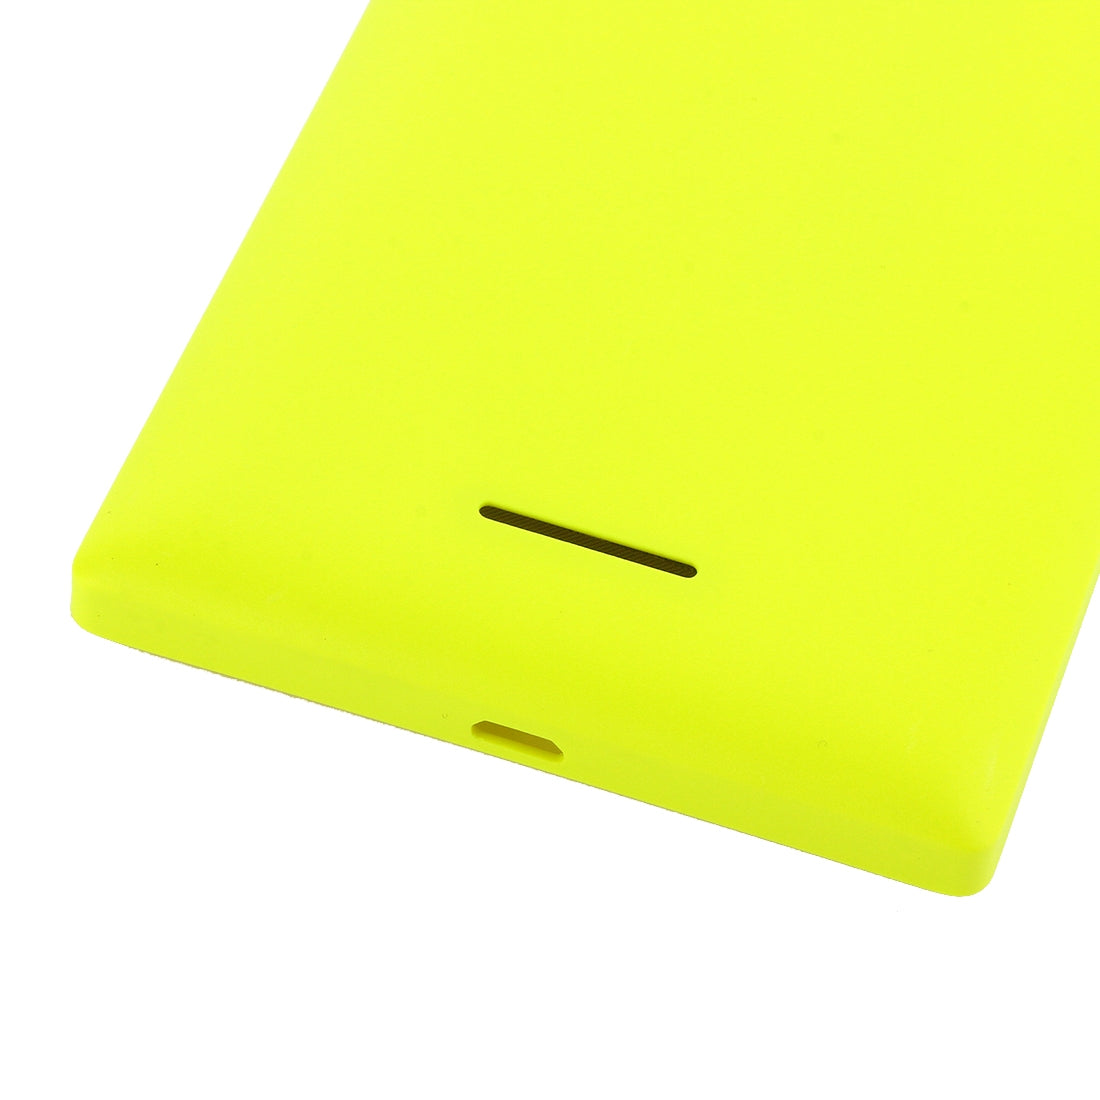 Battery Cover Back Cover Nokia XL Yellow